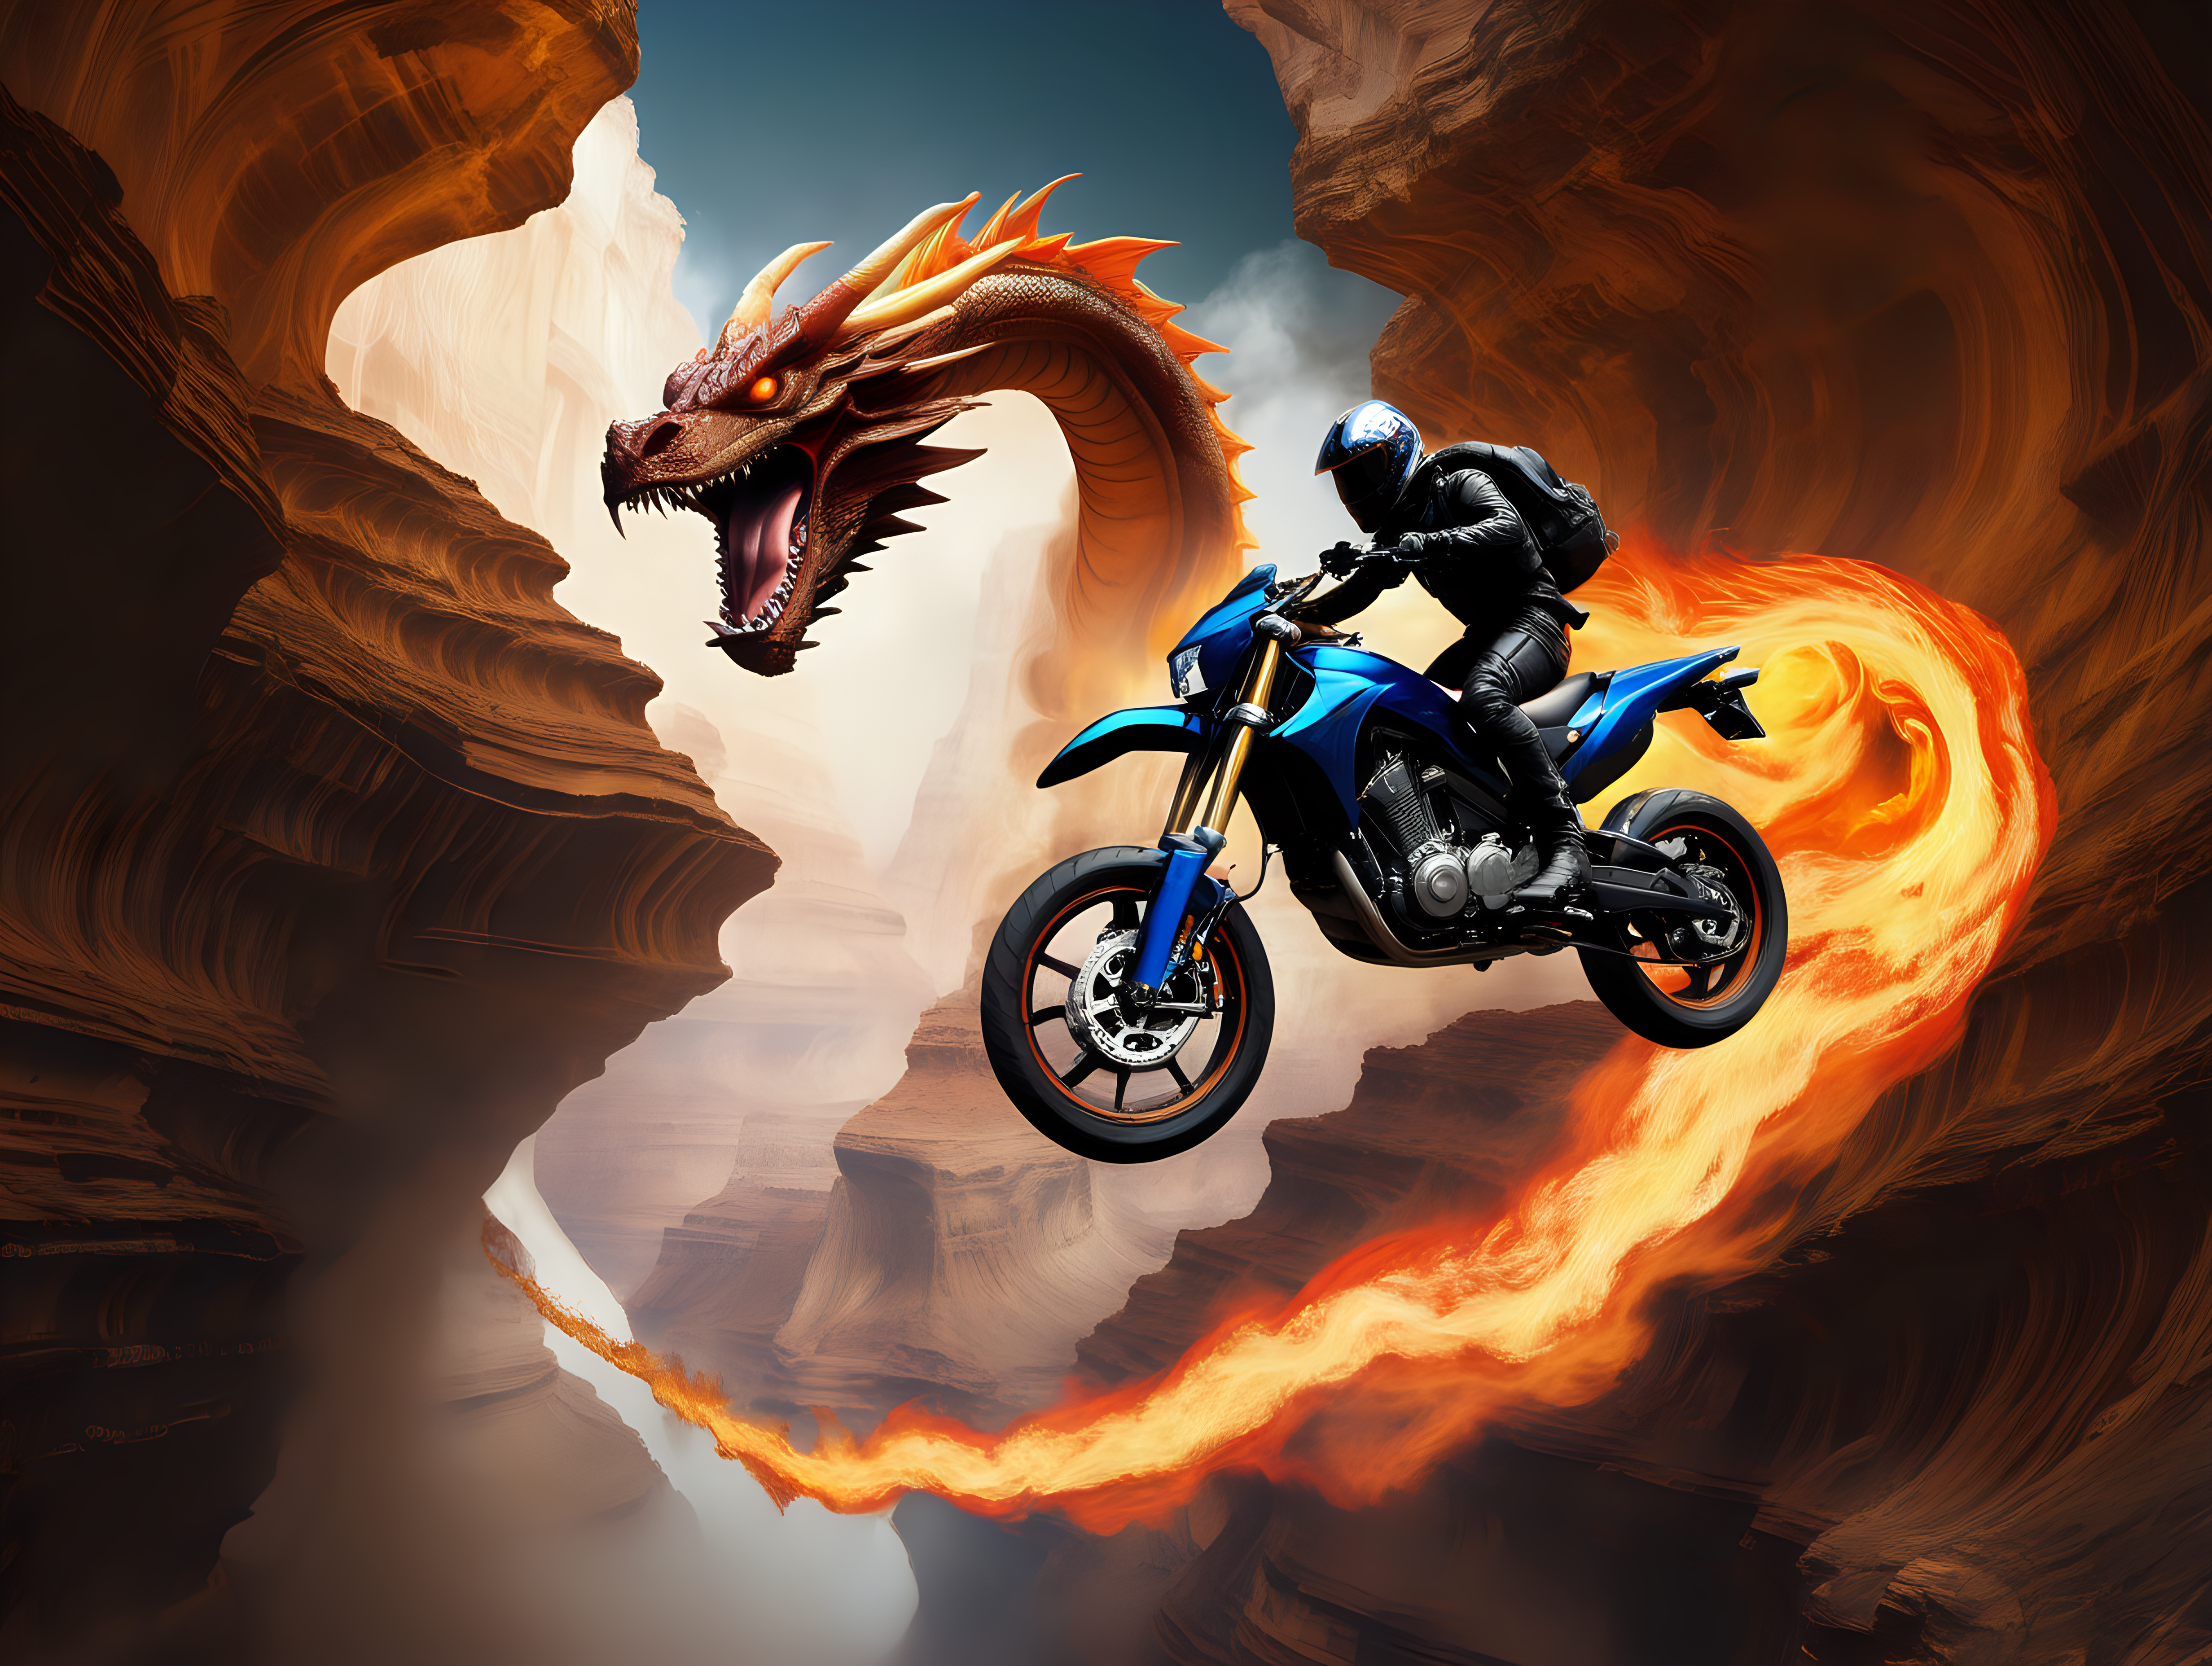 Motorcycle jumping a canyon on Jupiter chased by